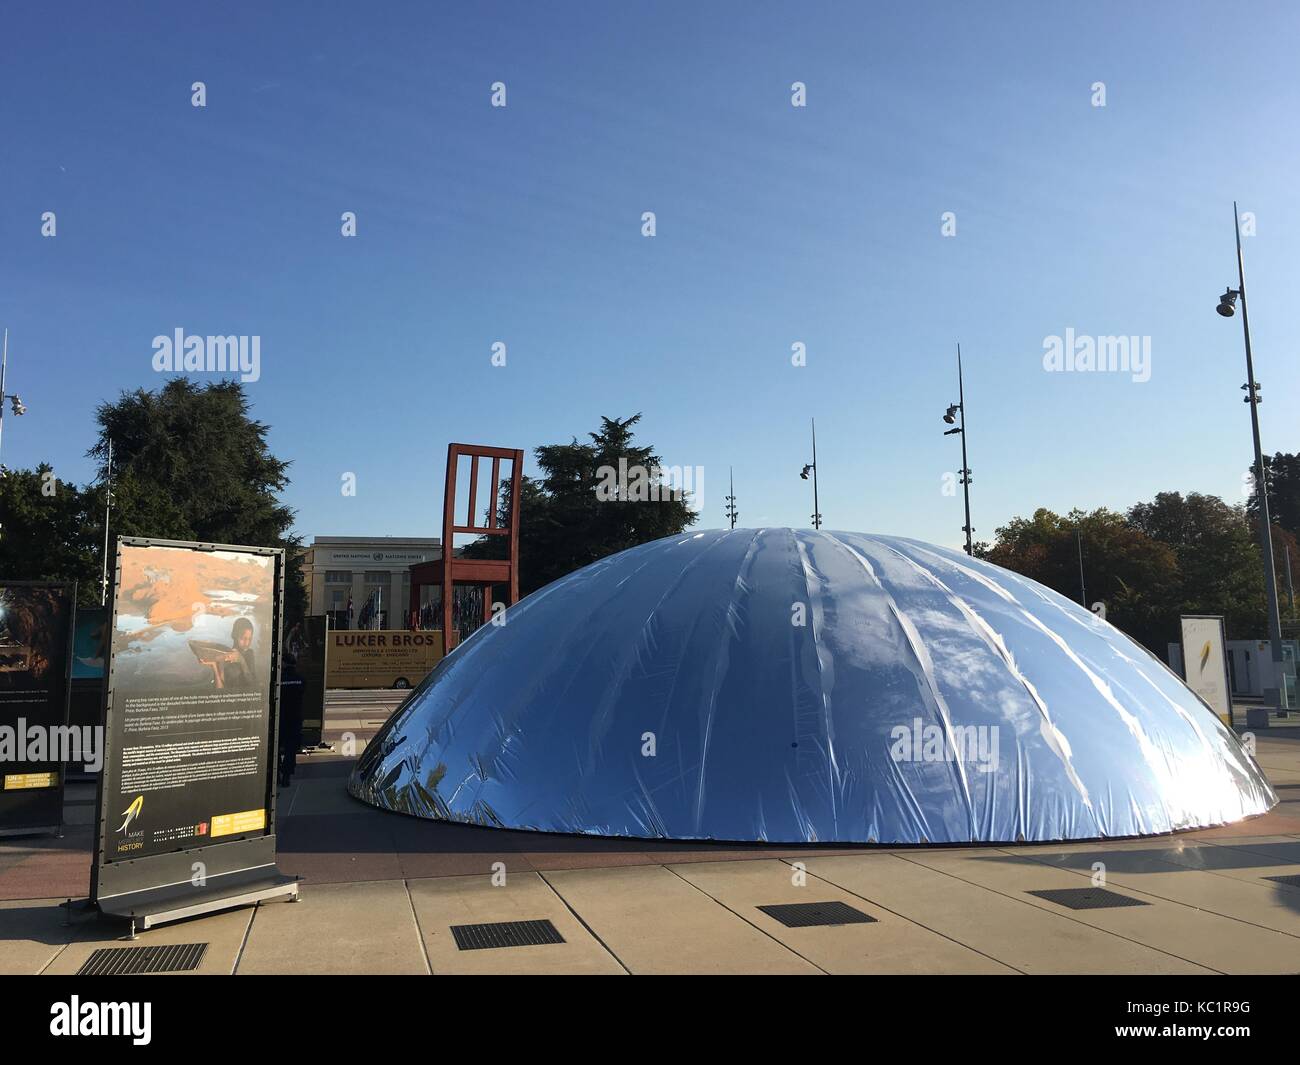 A tent in the shape of a large drop of mercury standing in front of the Palace of the League of Nations in Geneva, Switzerland, 28 Septmeber 2017. The tent serves the purpose of warning about the health risks of the highly toxic heavy metal. The mercury drop was realiyed in cooperation with the secretary of the Minamata Convention on Mercury and the network of Plastique Fantastique, based in Berlin. The focus of the Minamata Convention on Mercury is reducing the emission of mercury. Photo: Christiane Oelrich/dpa Stock Photo